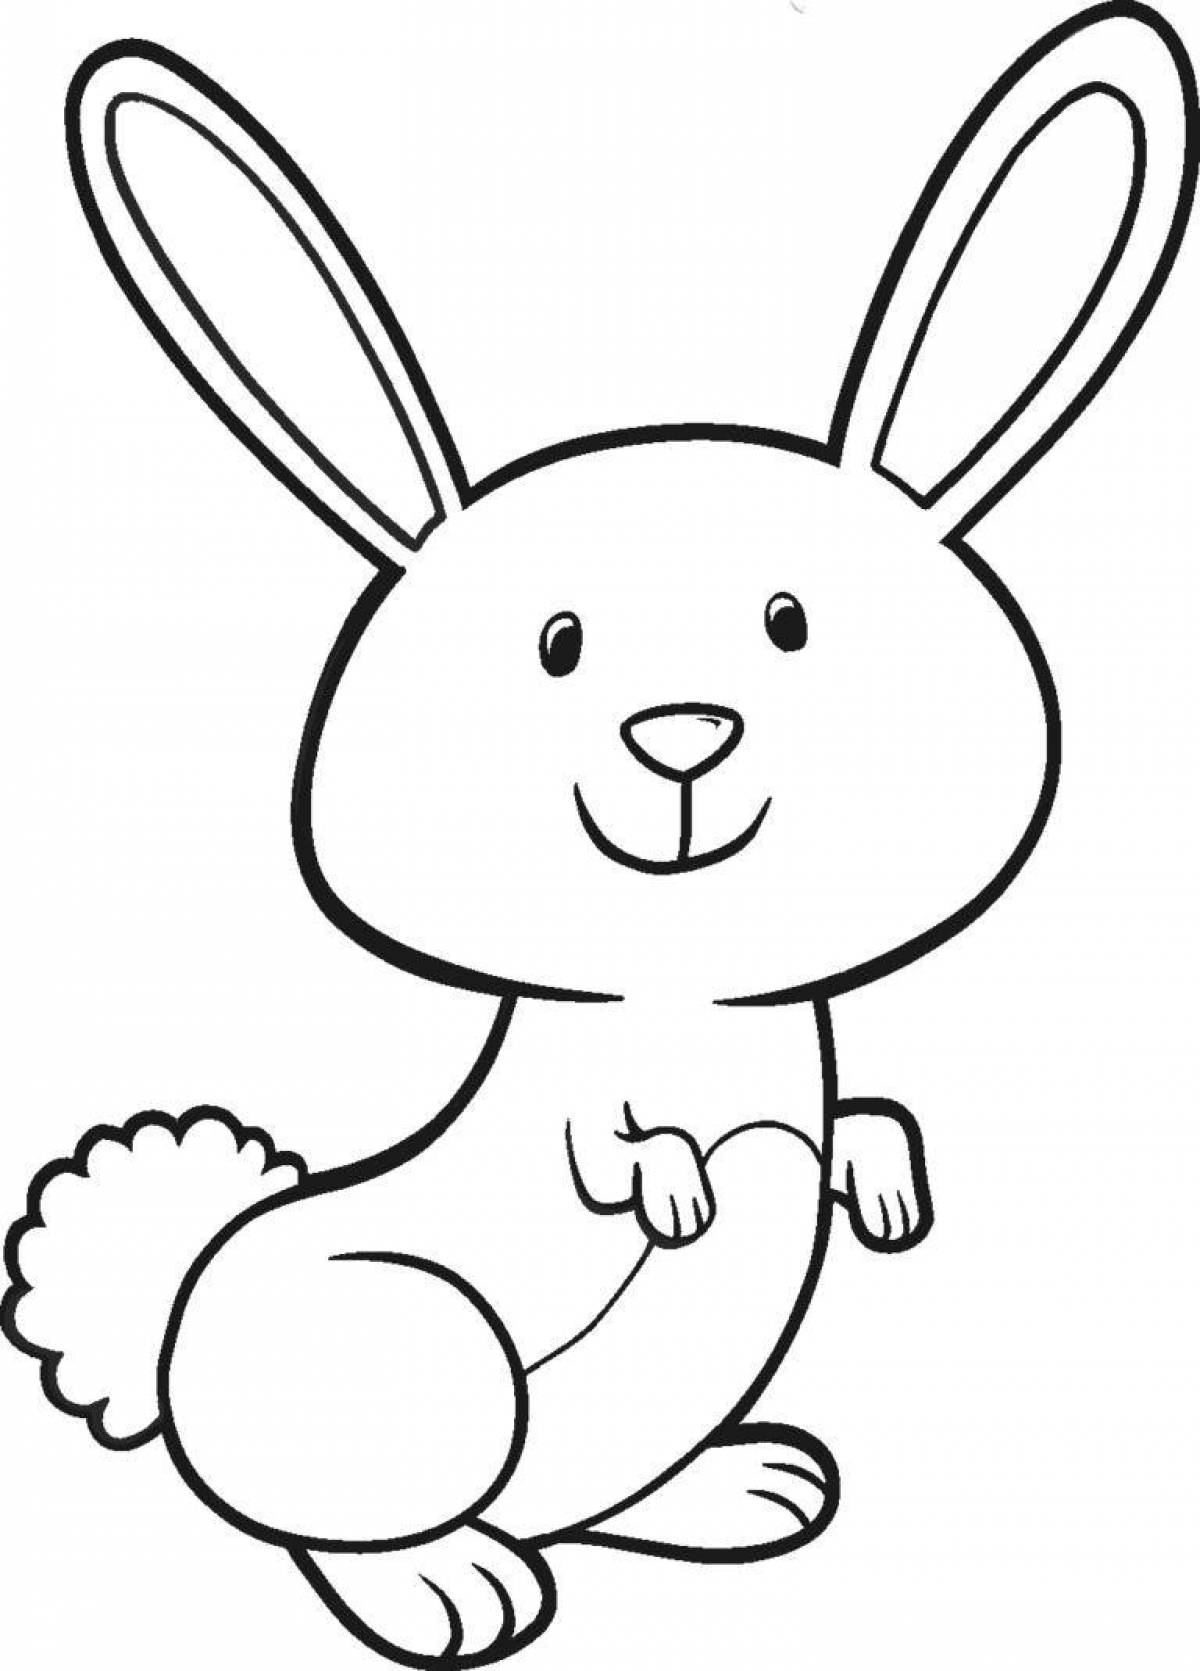 Adorable hare coloring for pre-k